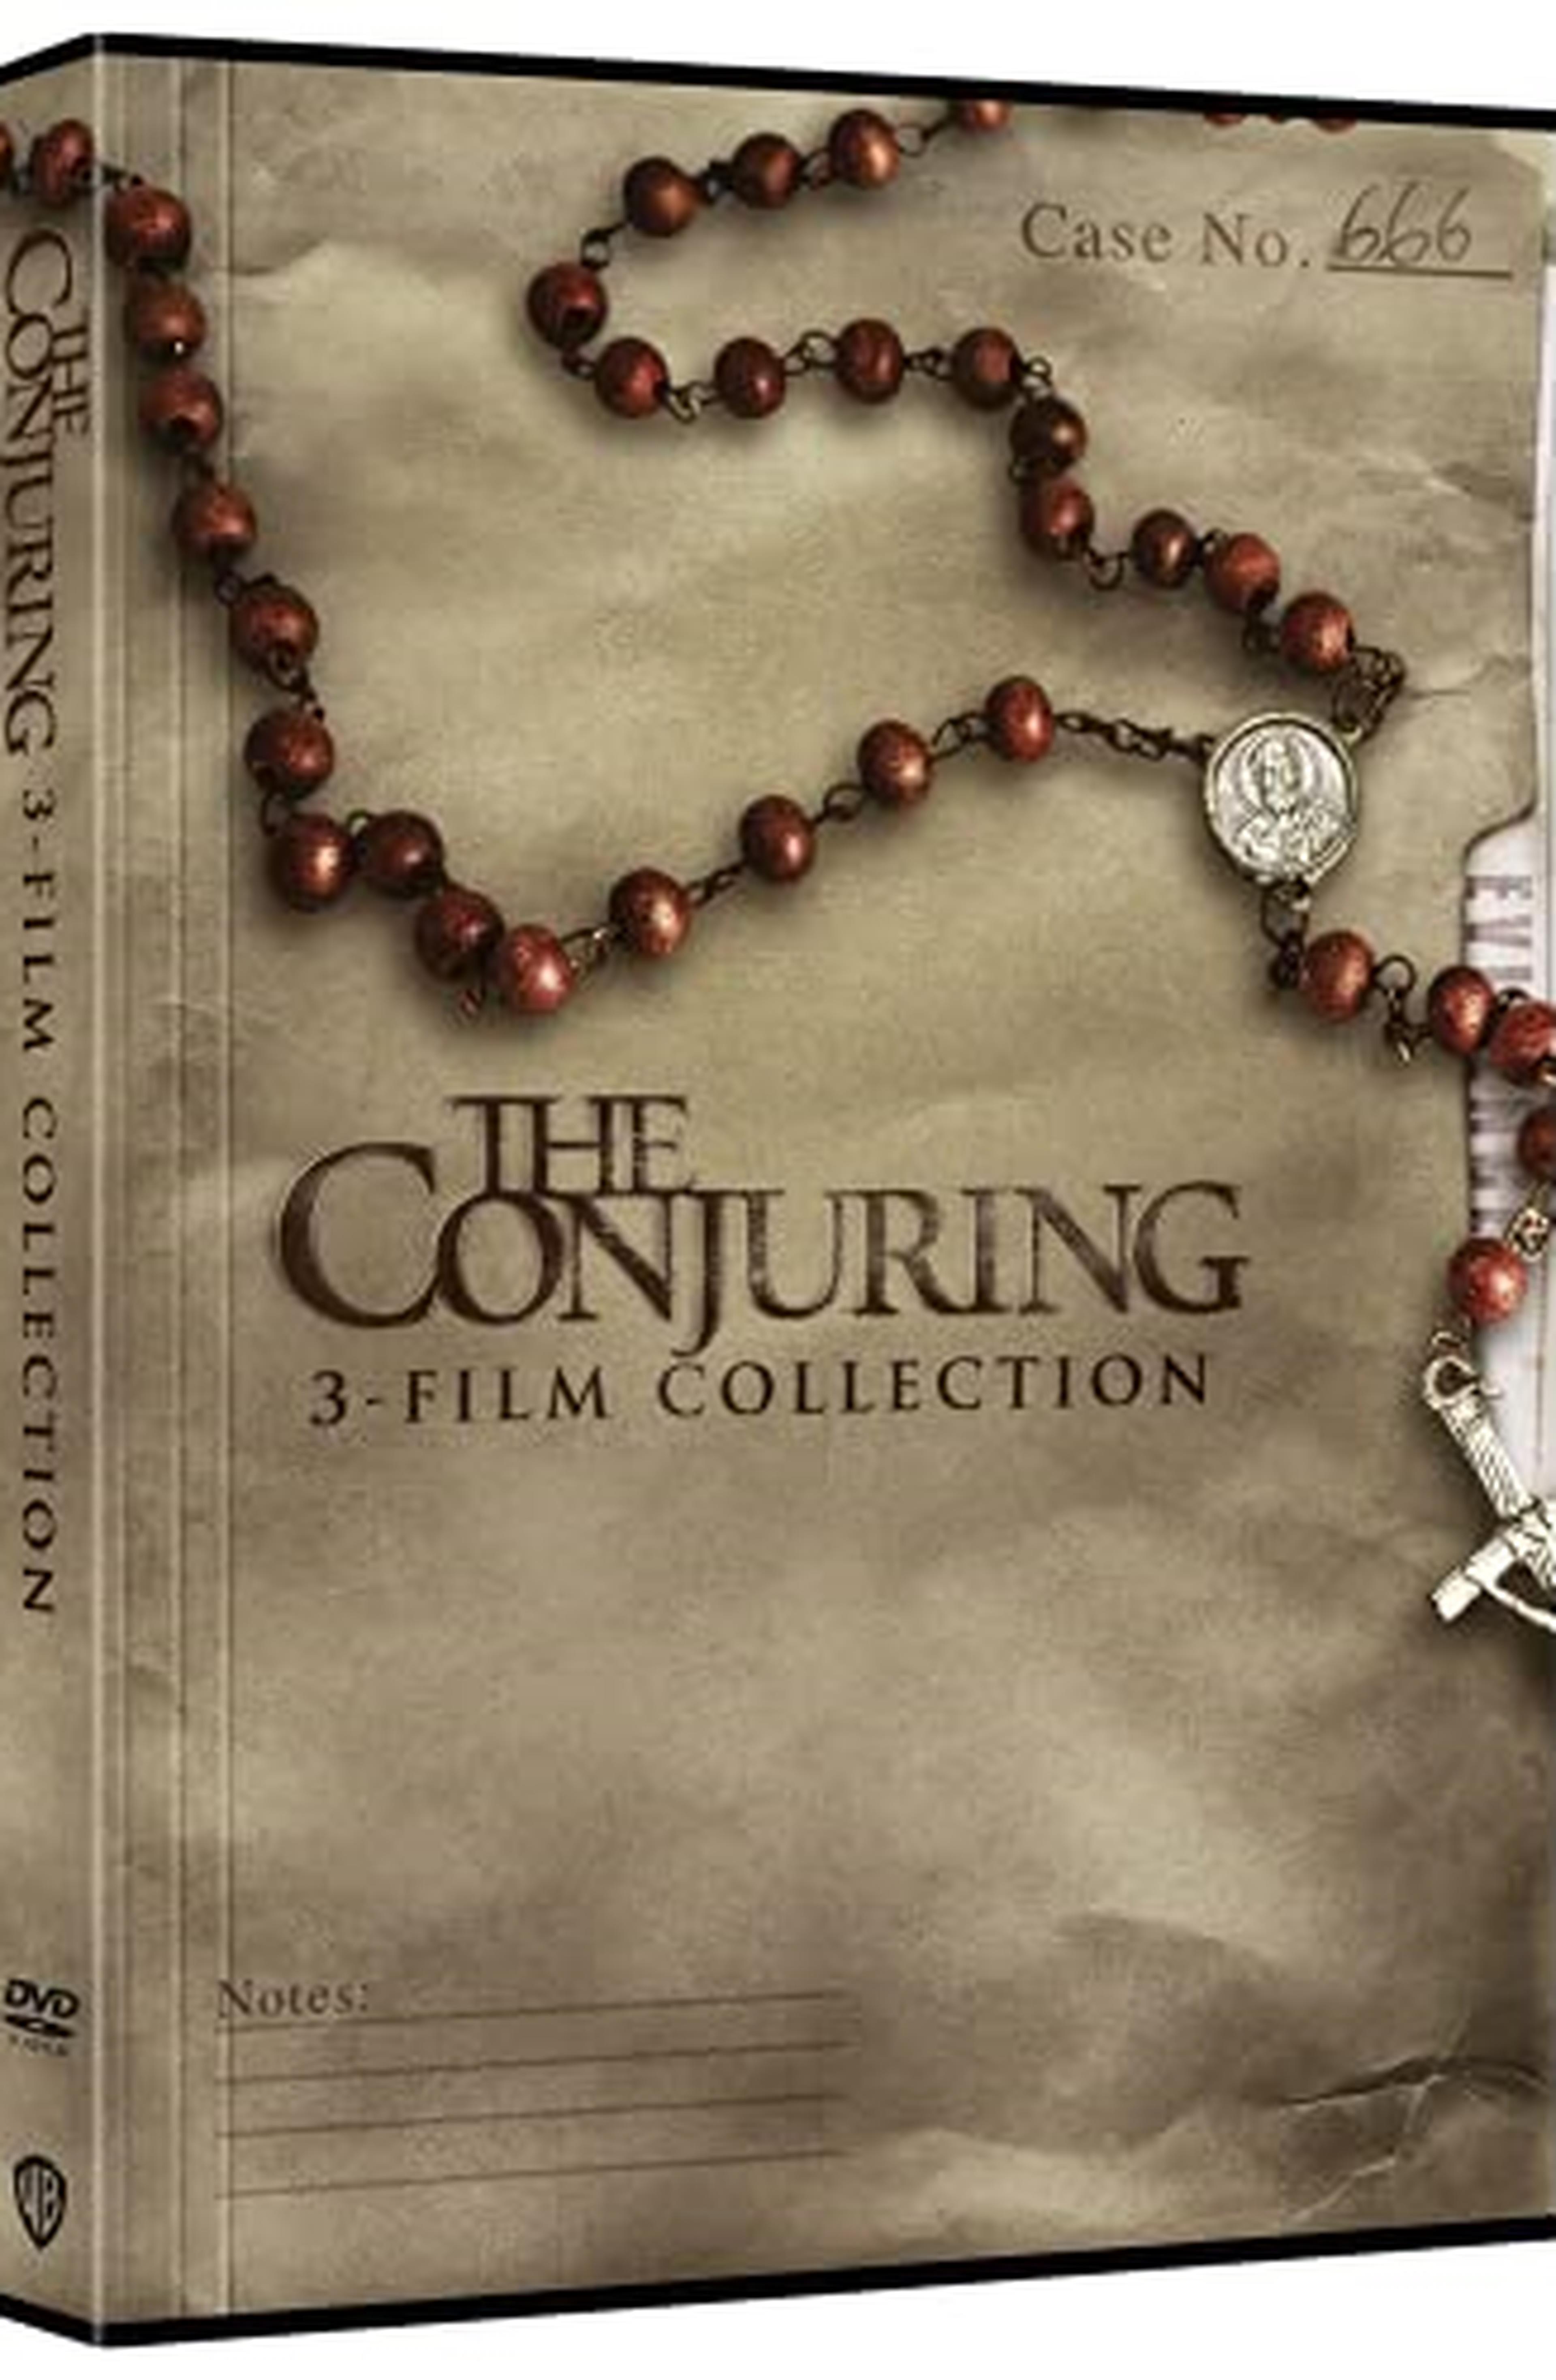 The Conjuring - 3 Film Collection (DVD) (3 DVD)